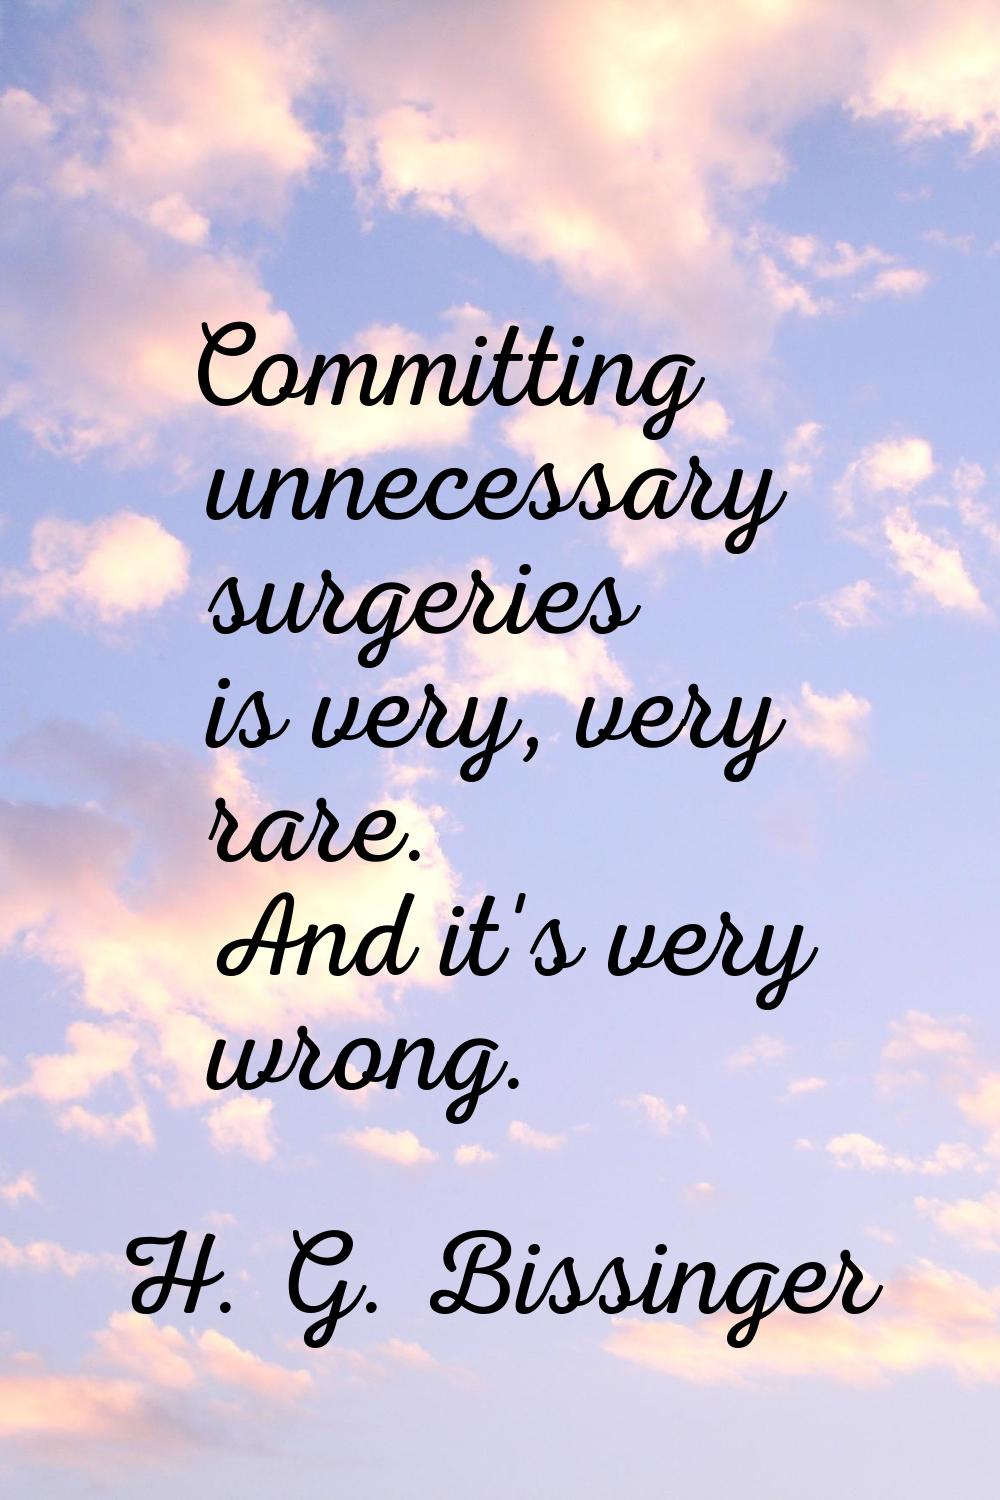 Committing unnecessary surgeries is very, very rare. And it's very wrong.